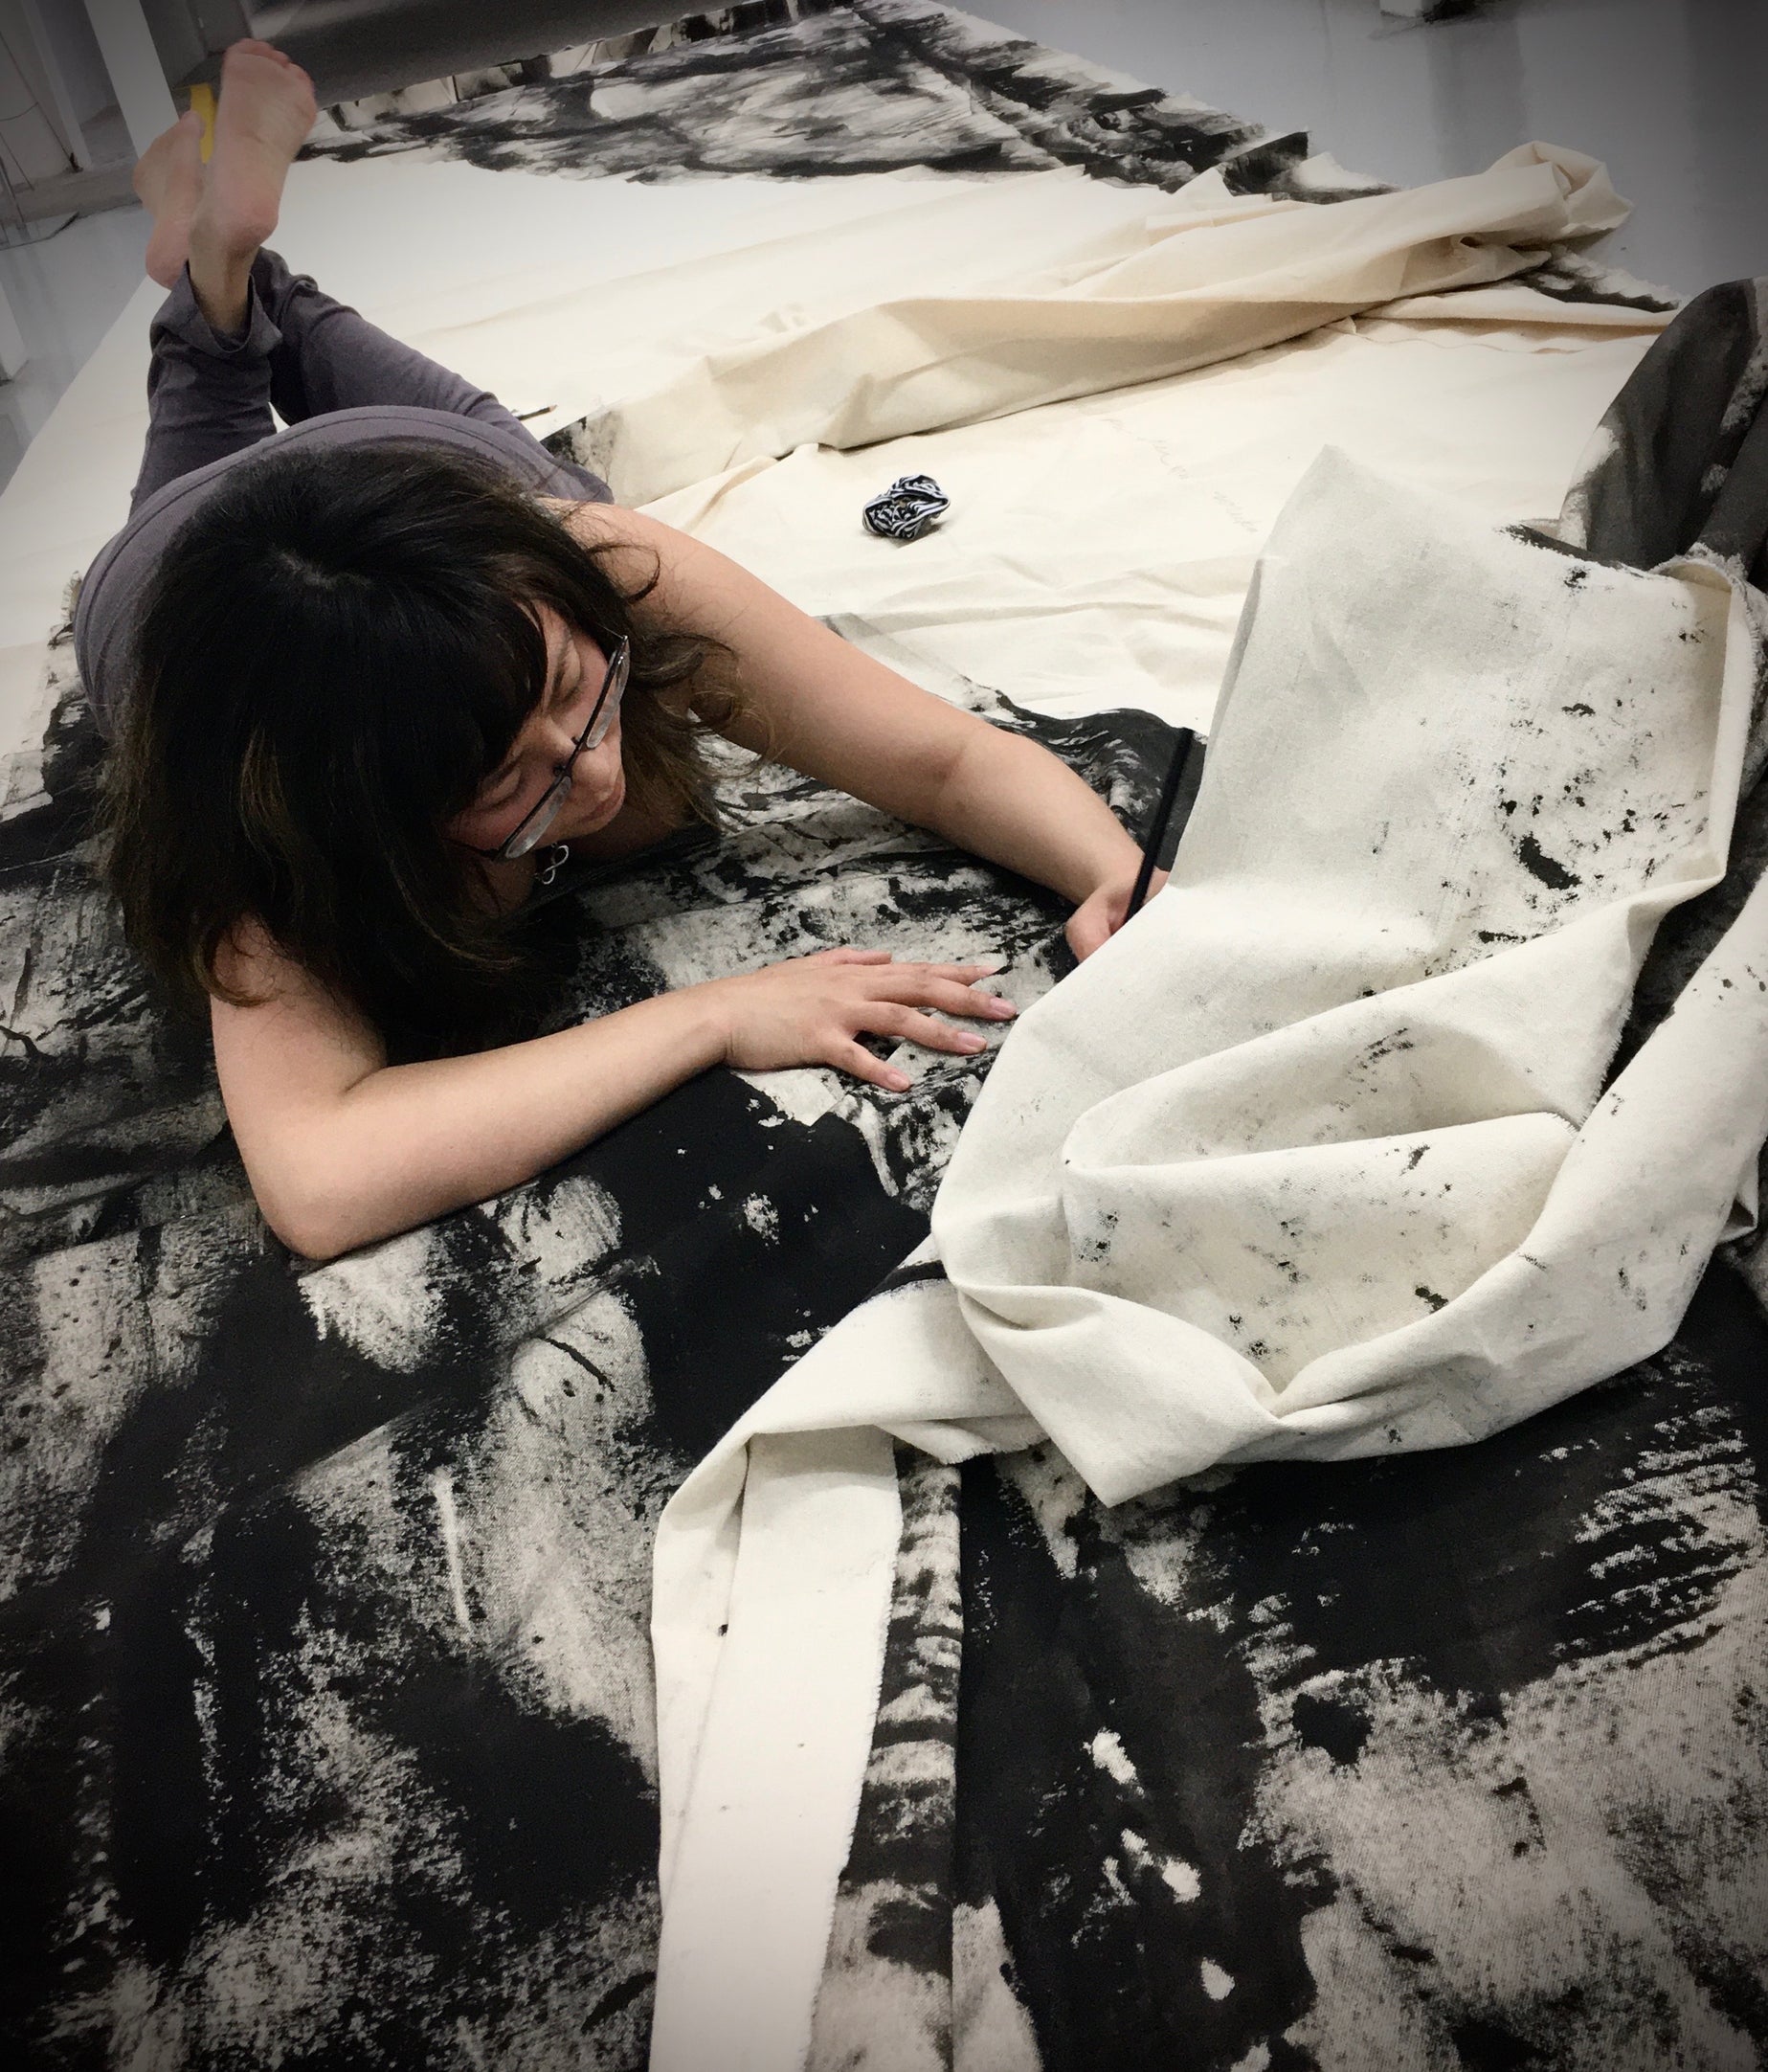 Rachel Gonzales lays on top of the Portal of Healing canvas drawing on it